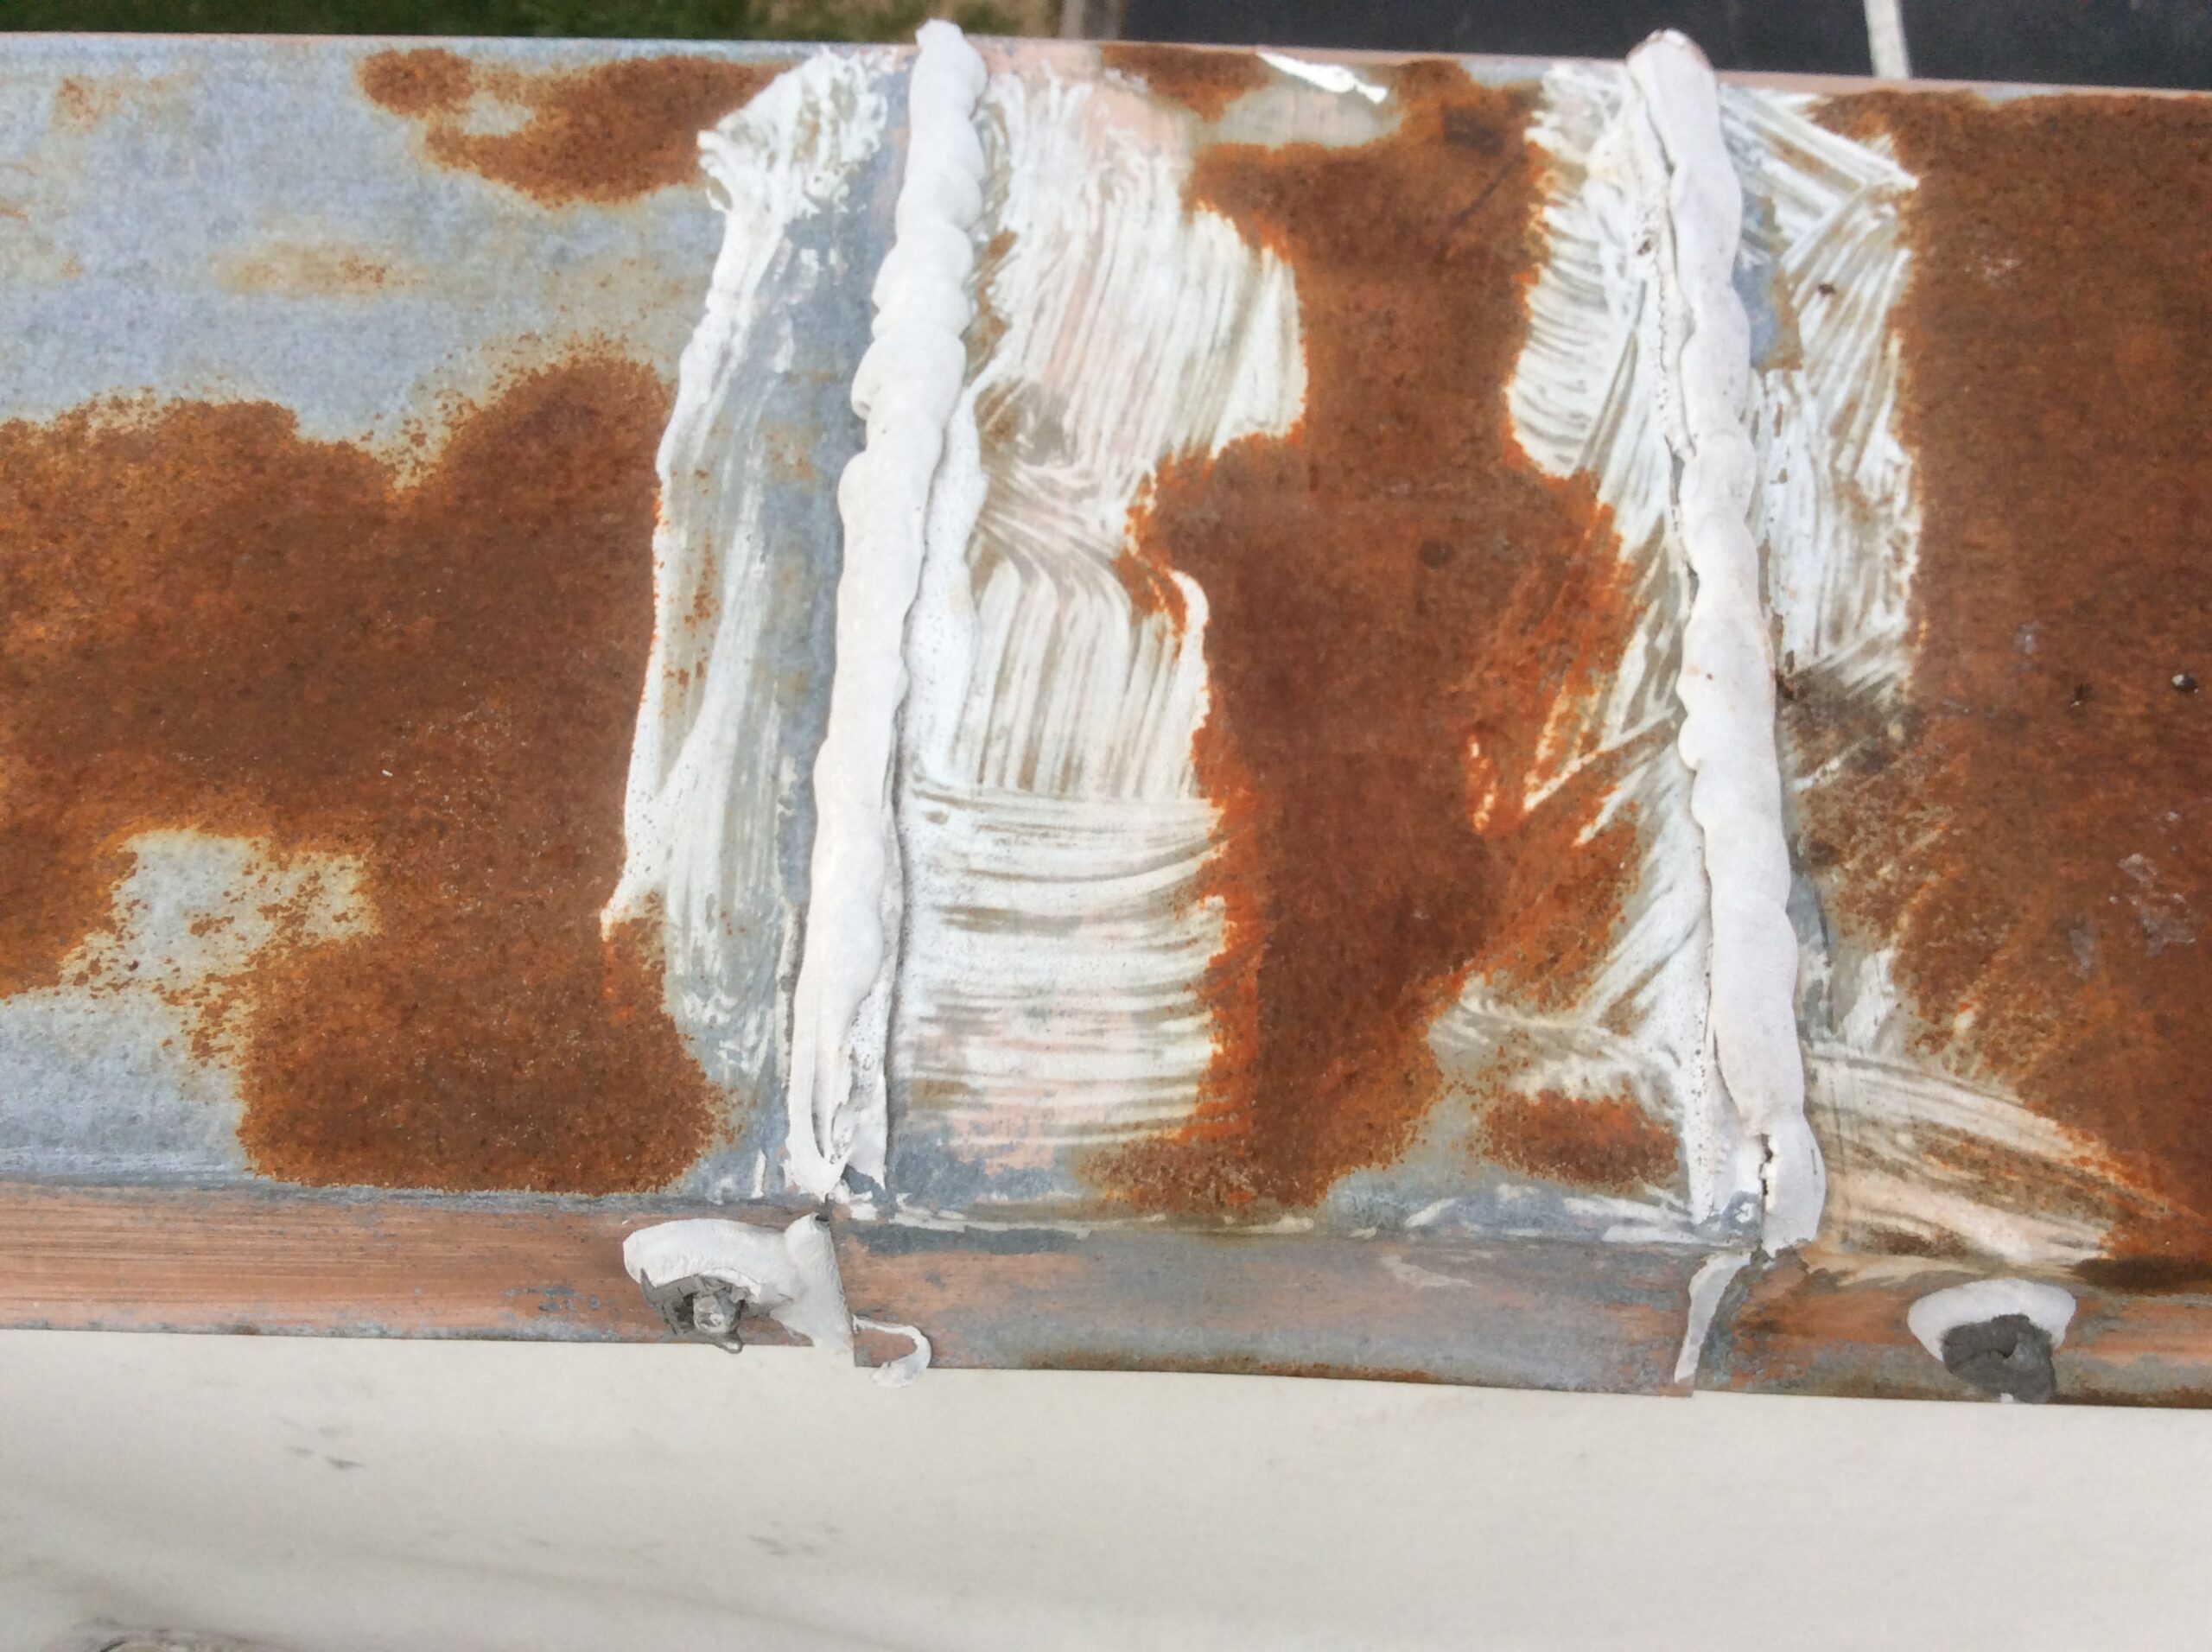 This is a view of rusted metal with white caulk to seal the laps.